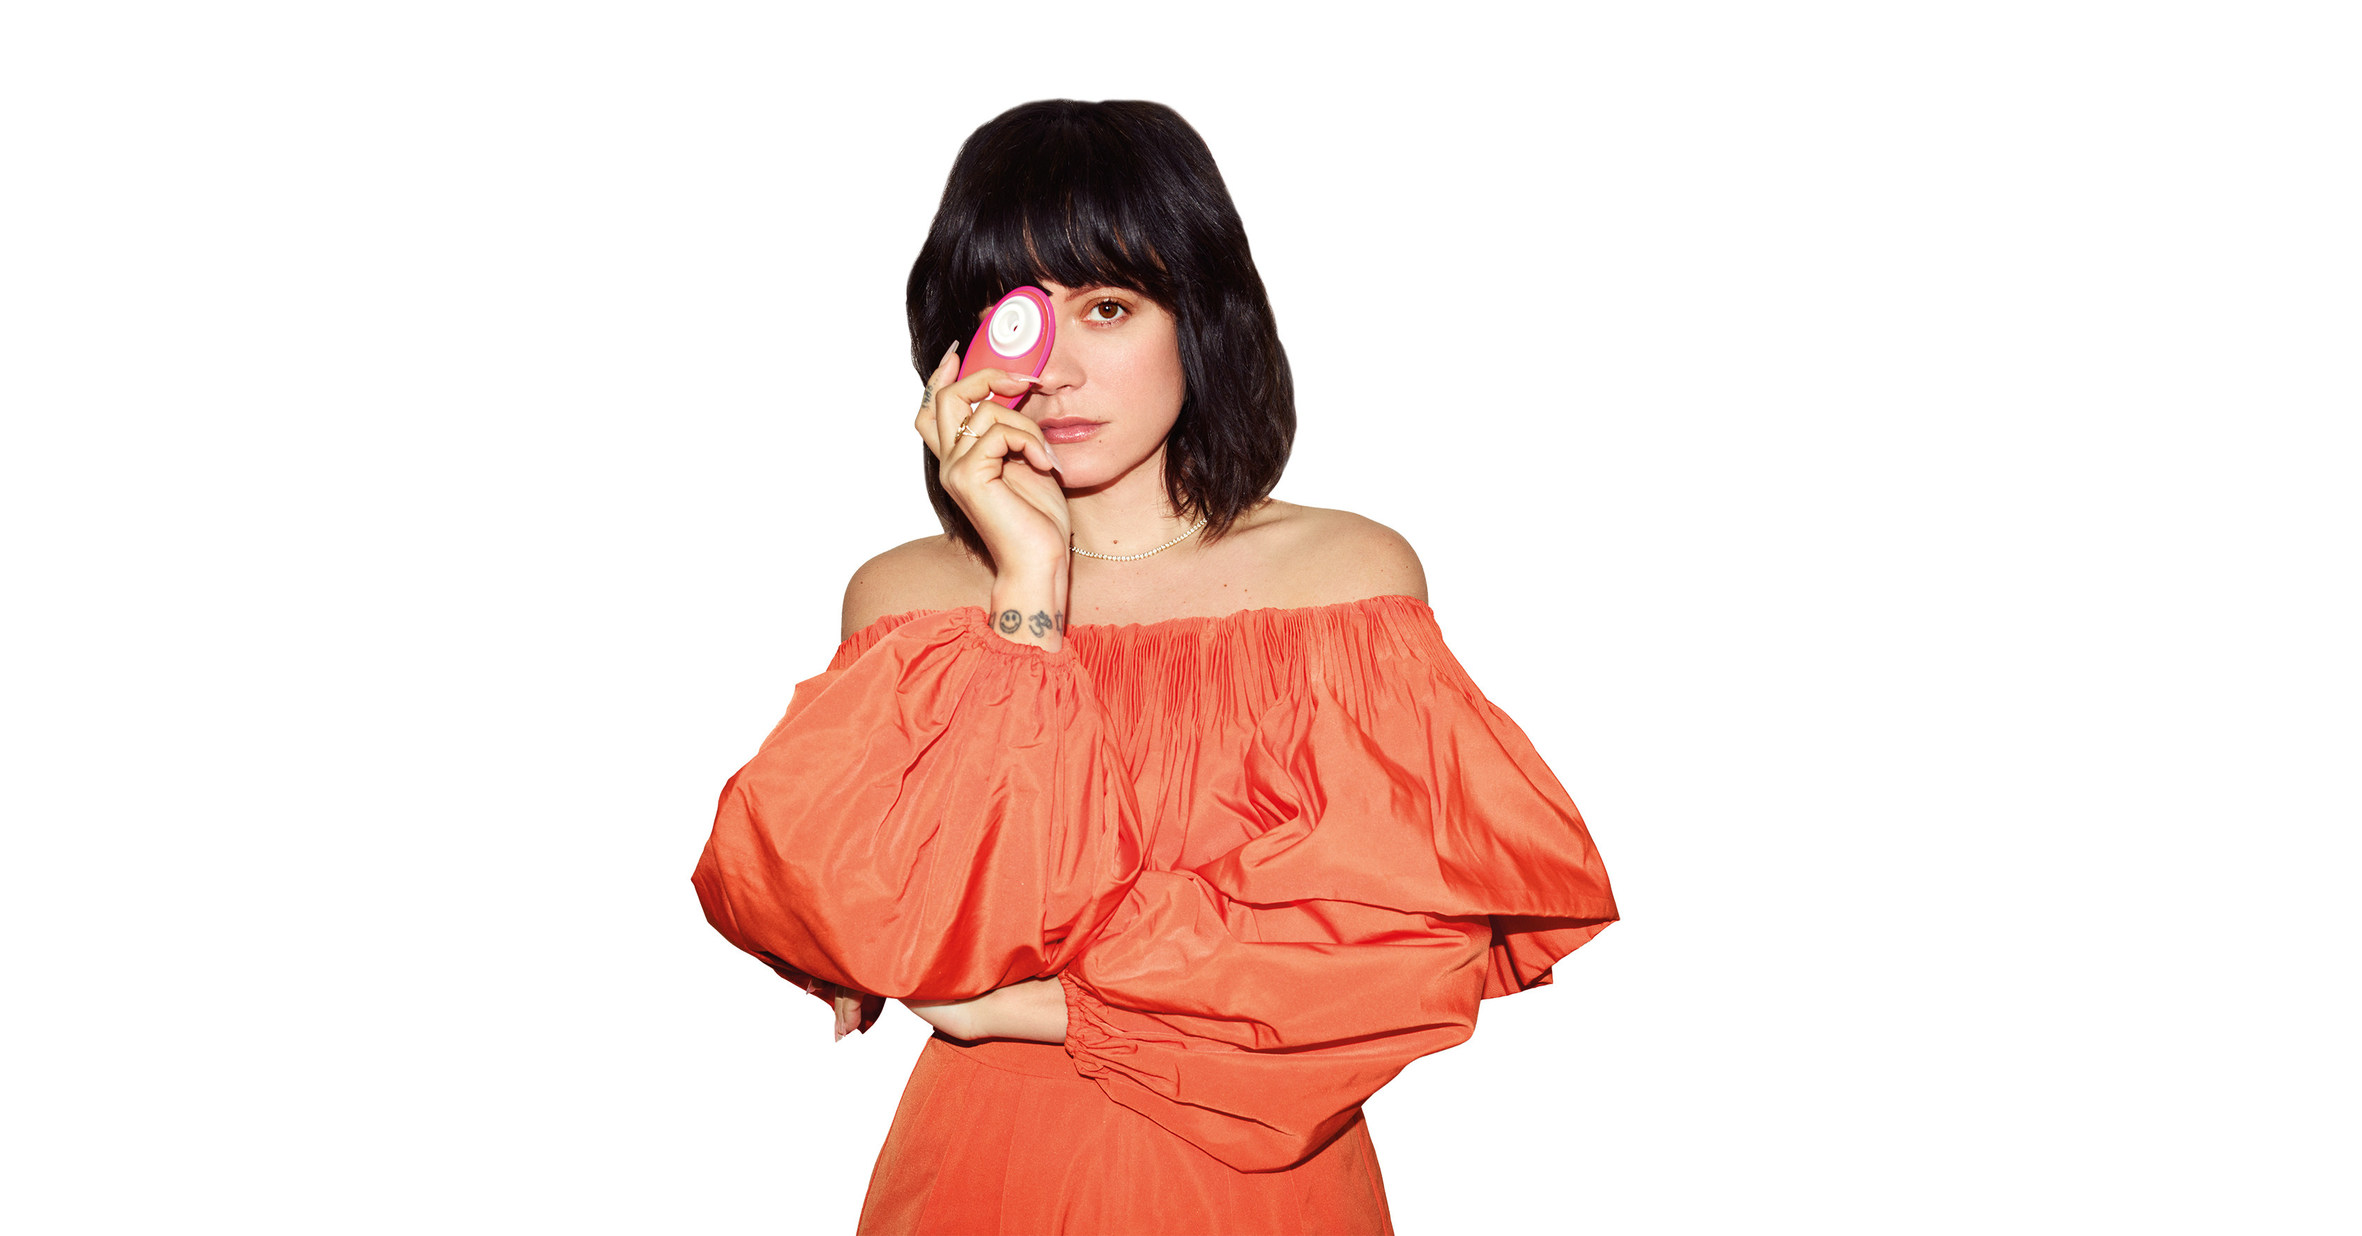 Lily Allen Announces Collaboration With Womanizer